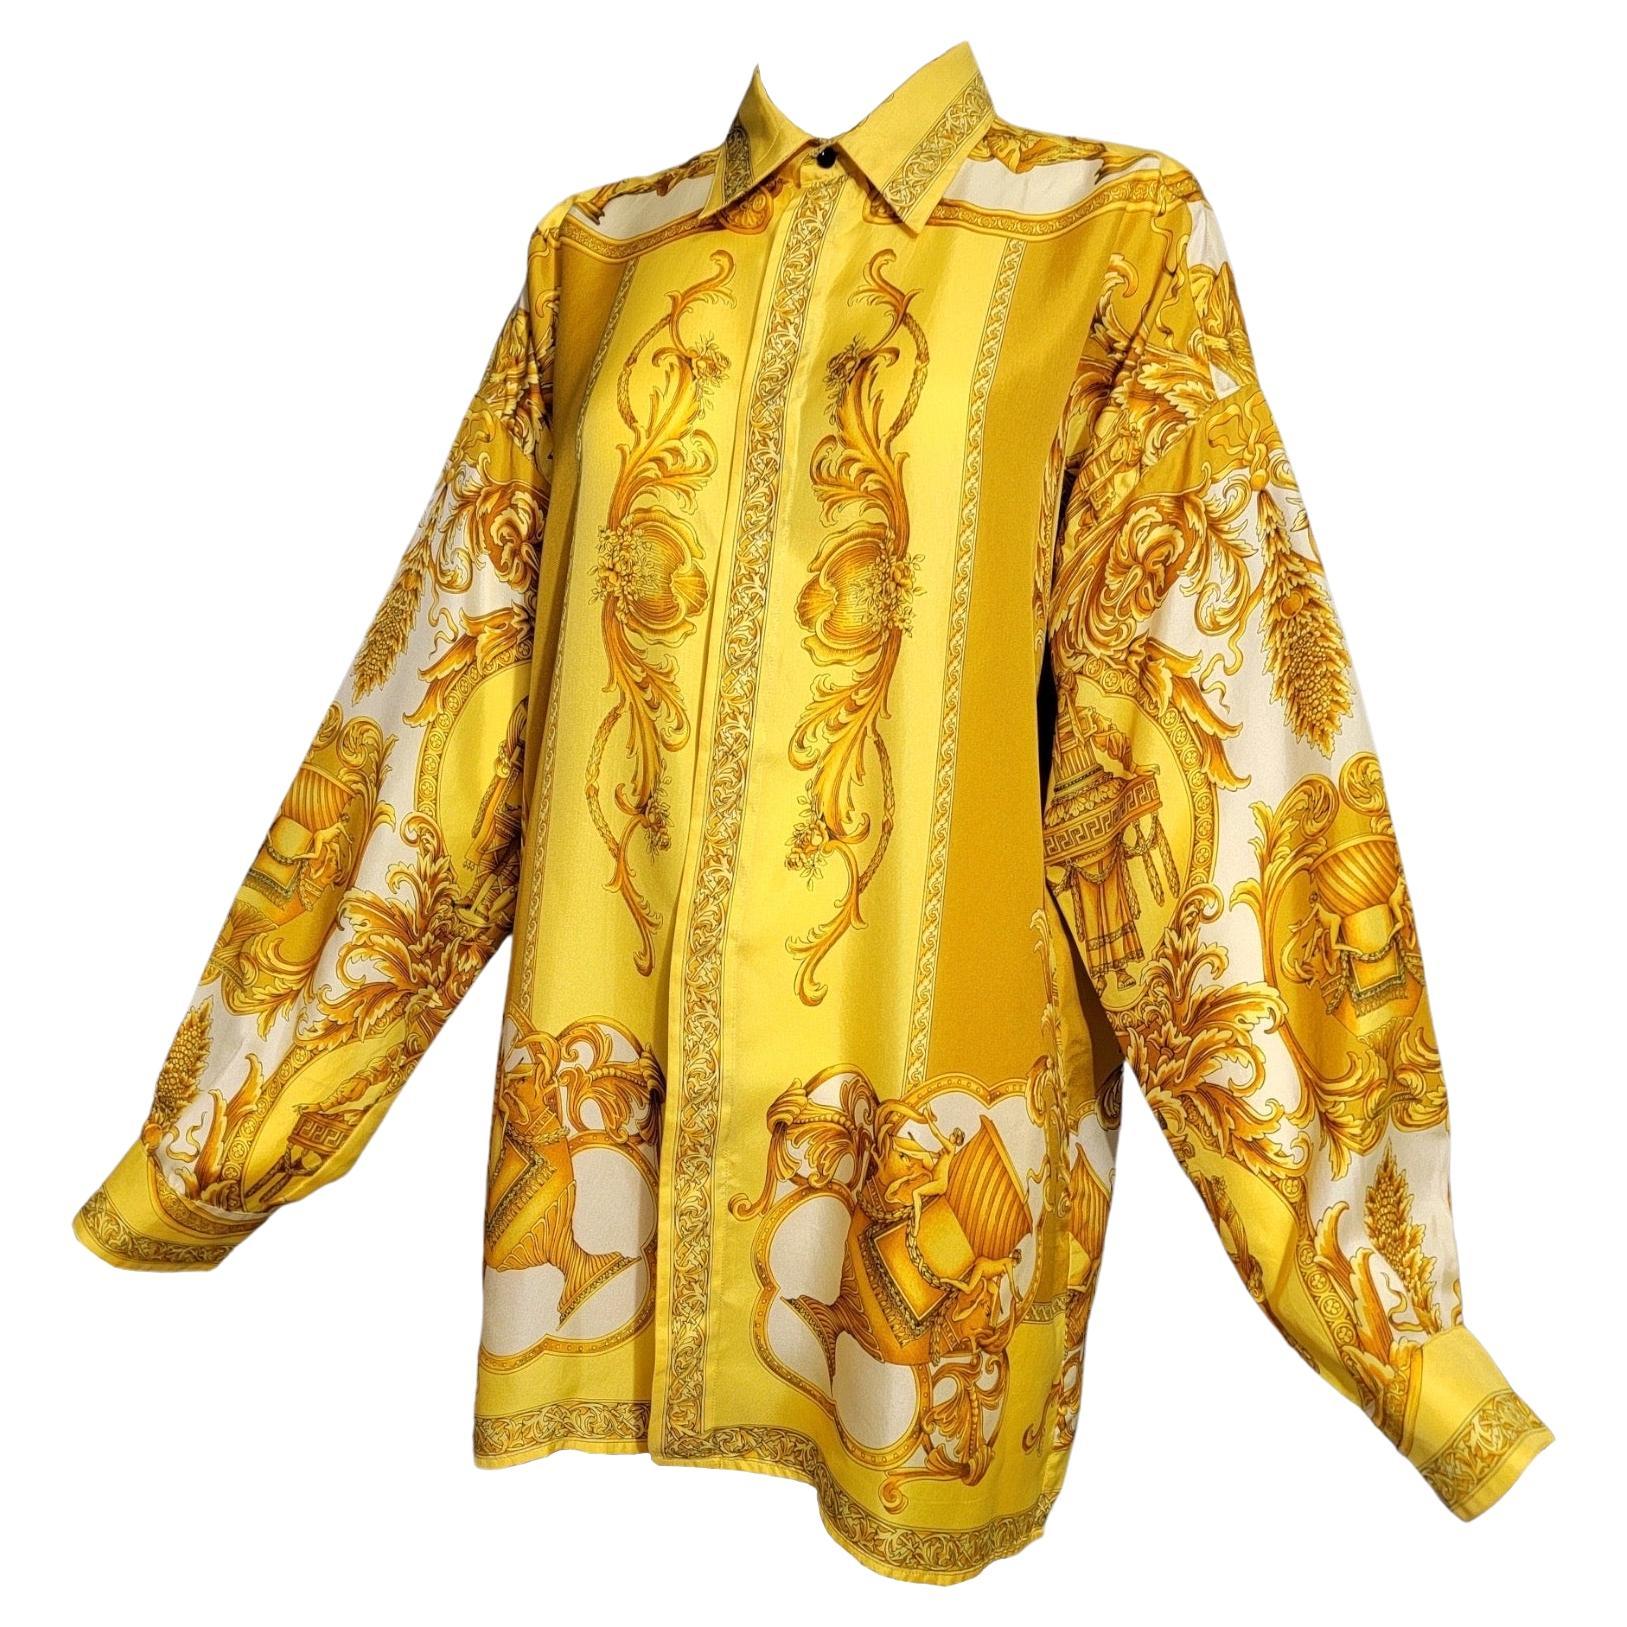 Gianni Versace Rococo Silk Shirt Men’s IT48 from 1995 In Excellent Condition For Sale In Concord, NC